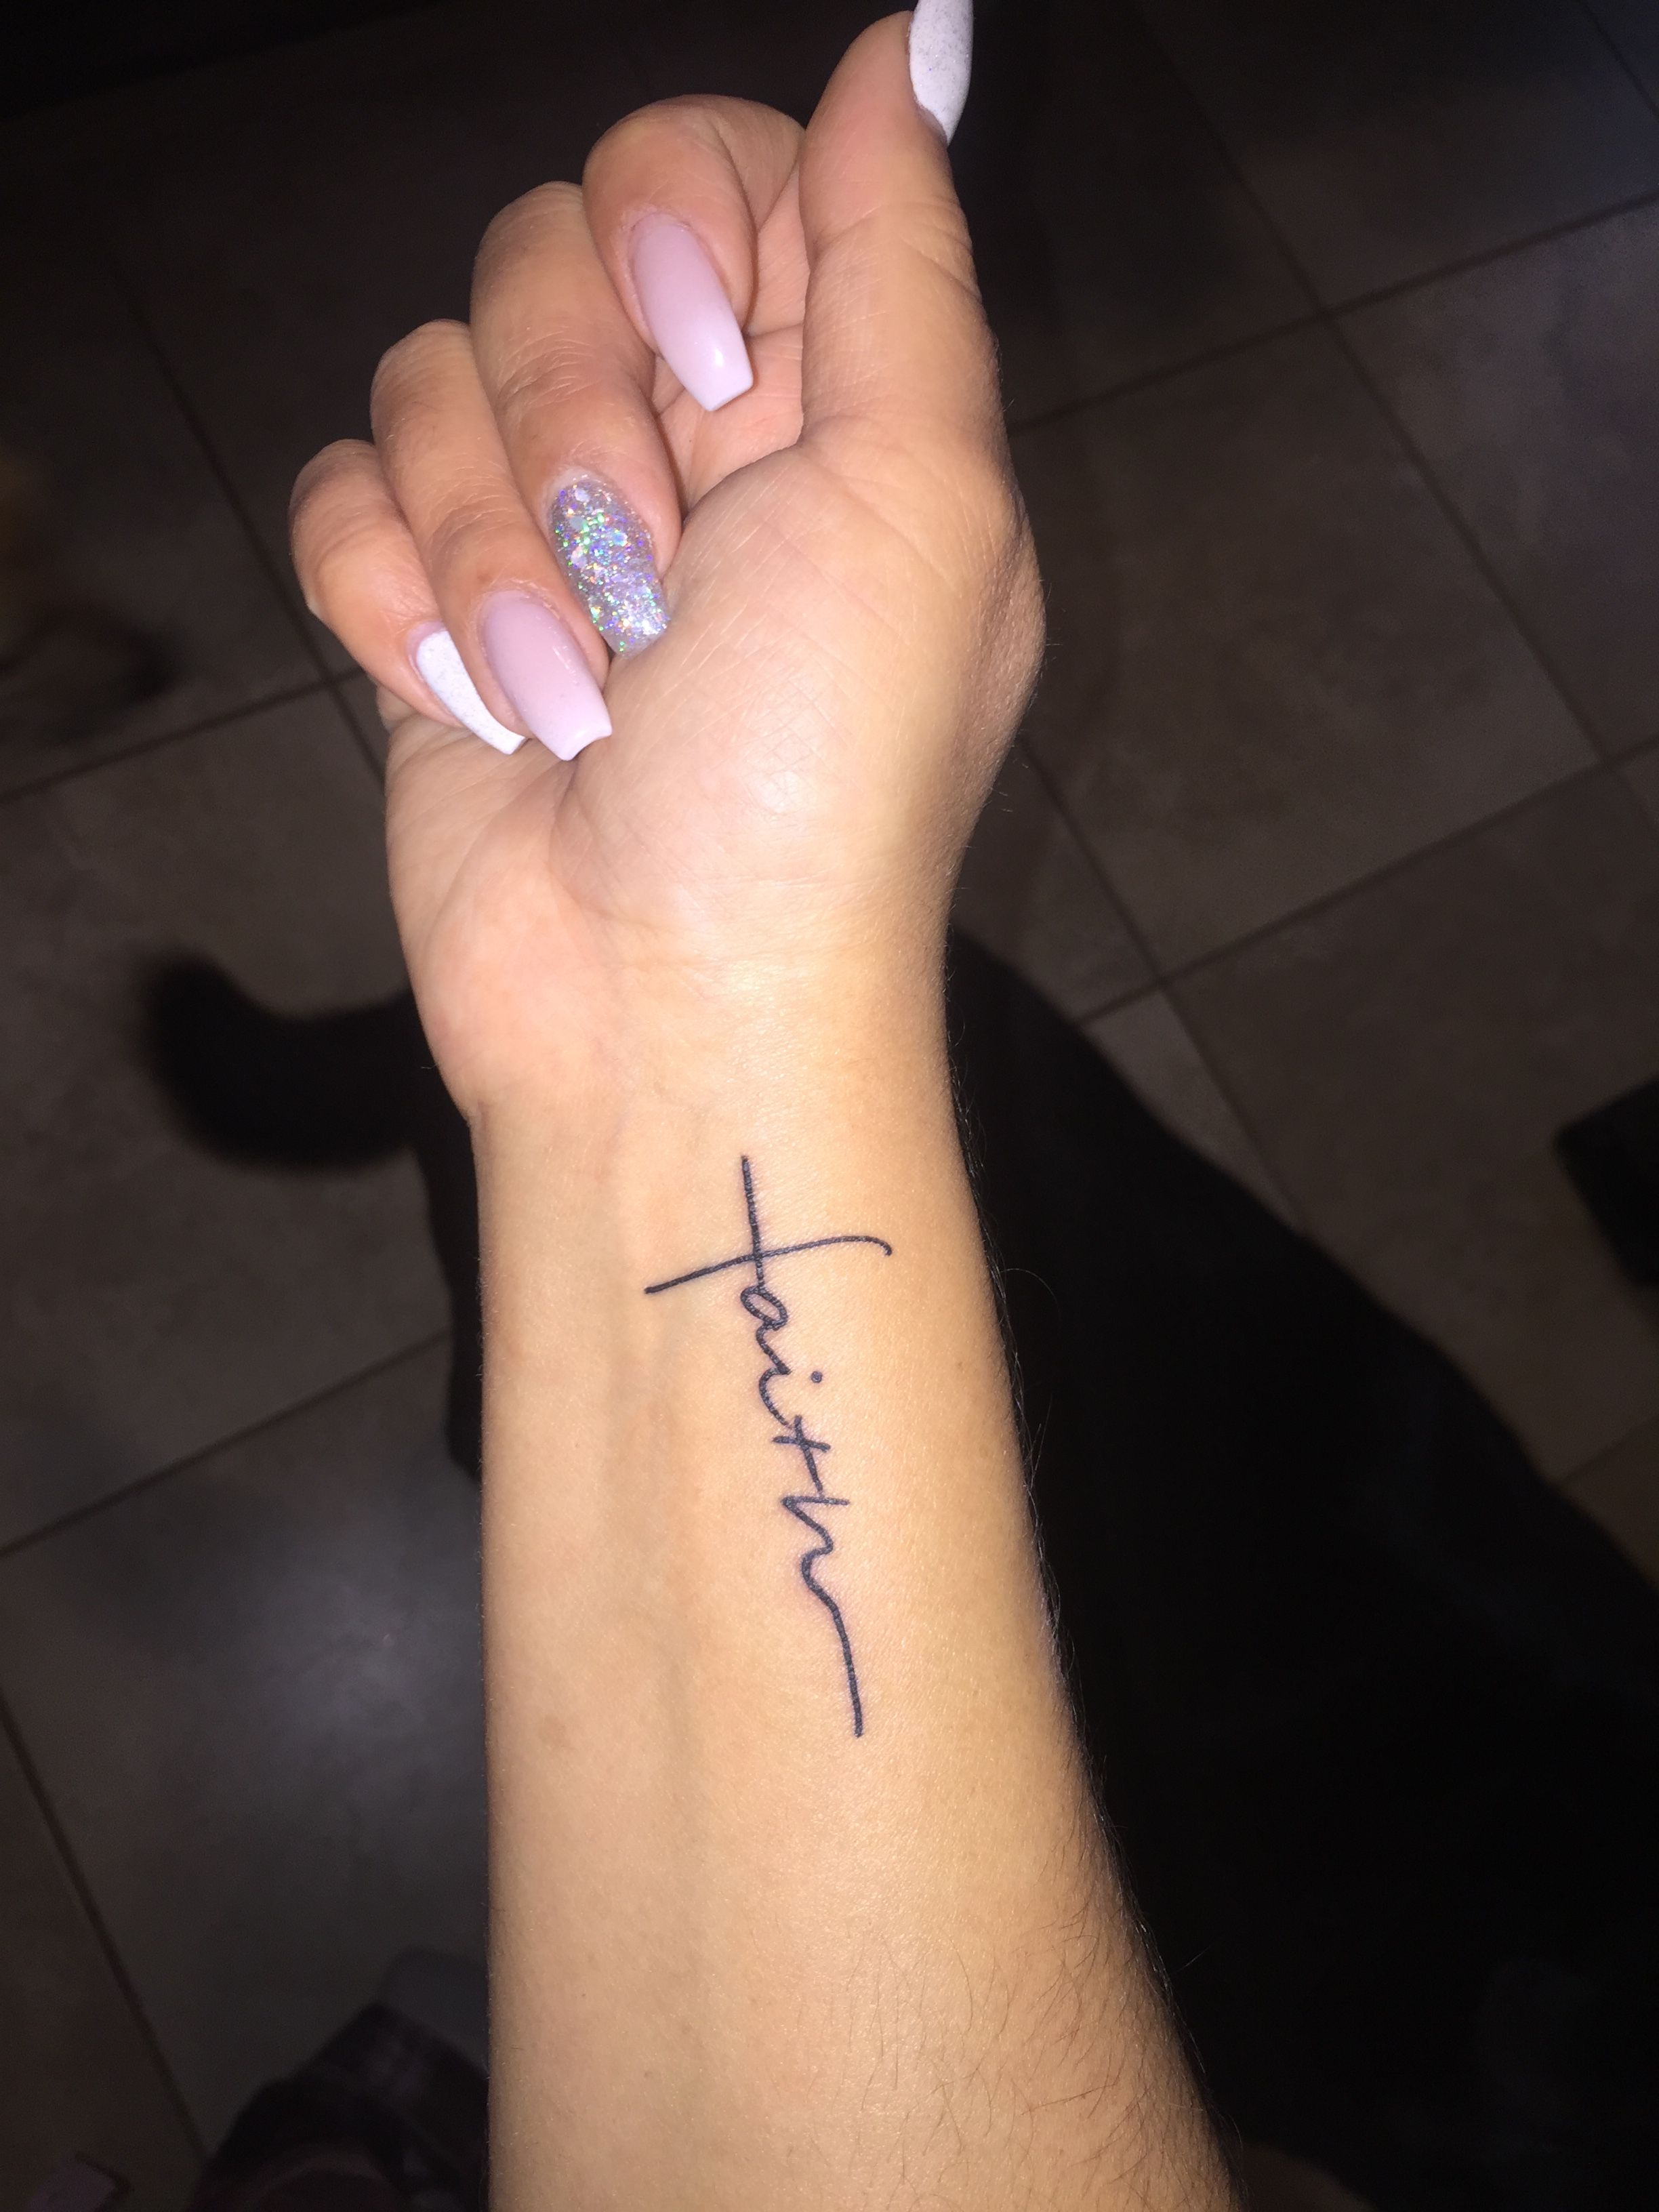 14 Faith Tattoos To Get Inspired Tattoo Me Now within measurements 2448 X 3264